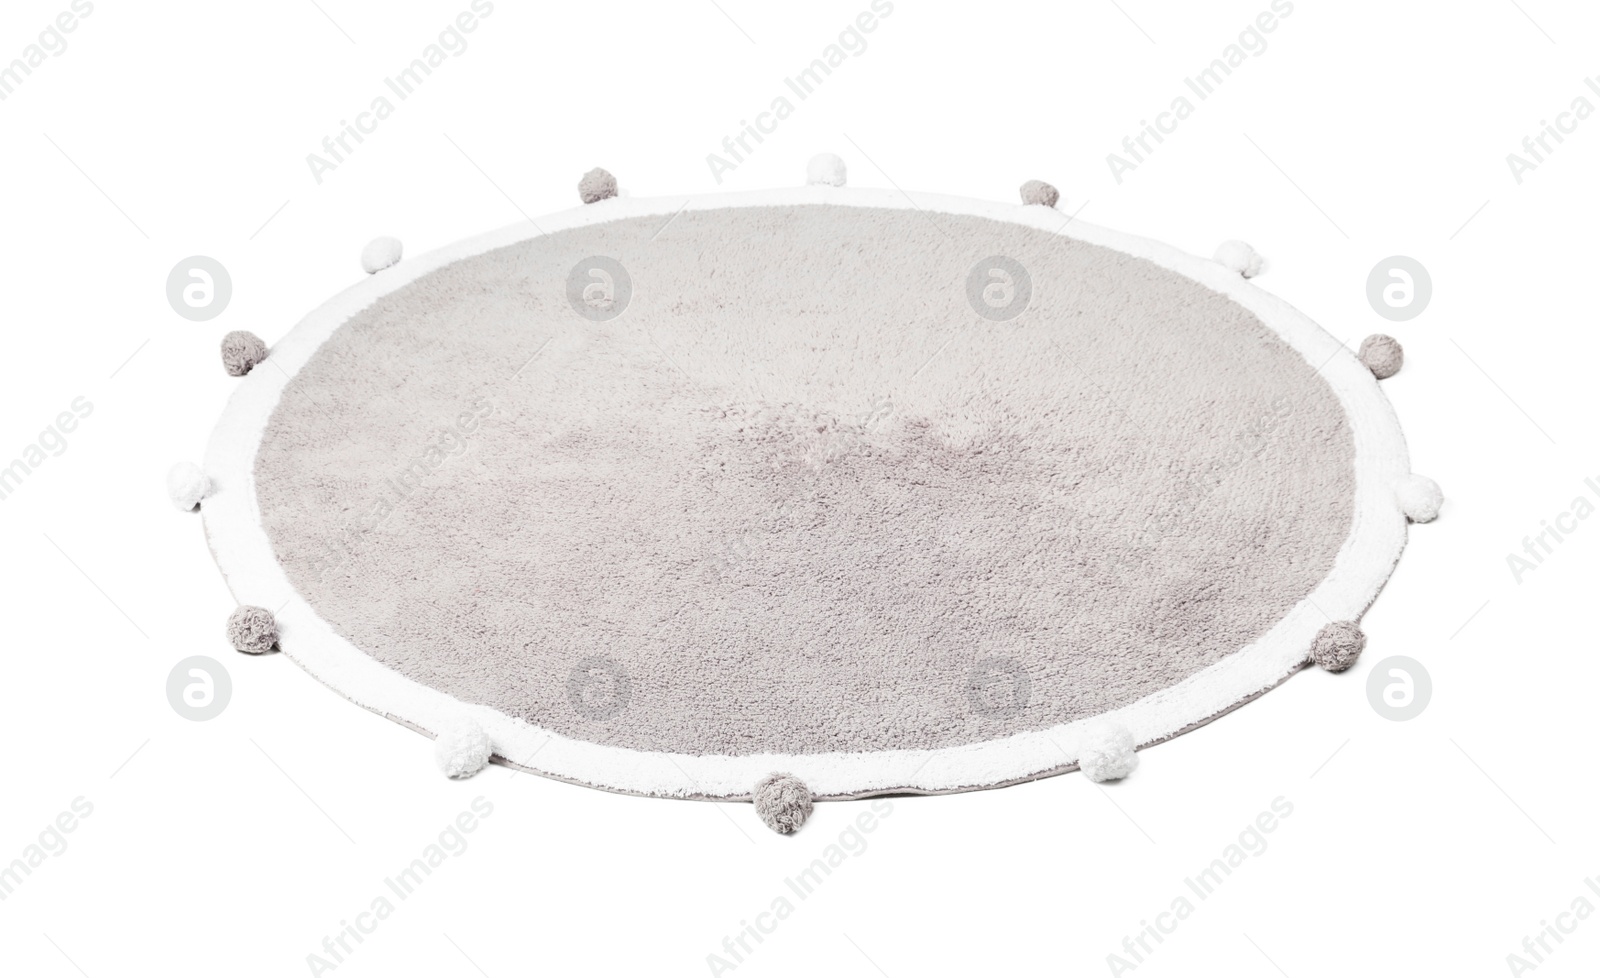 Photo of Round rug with pom poms isolated on white